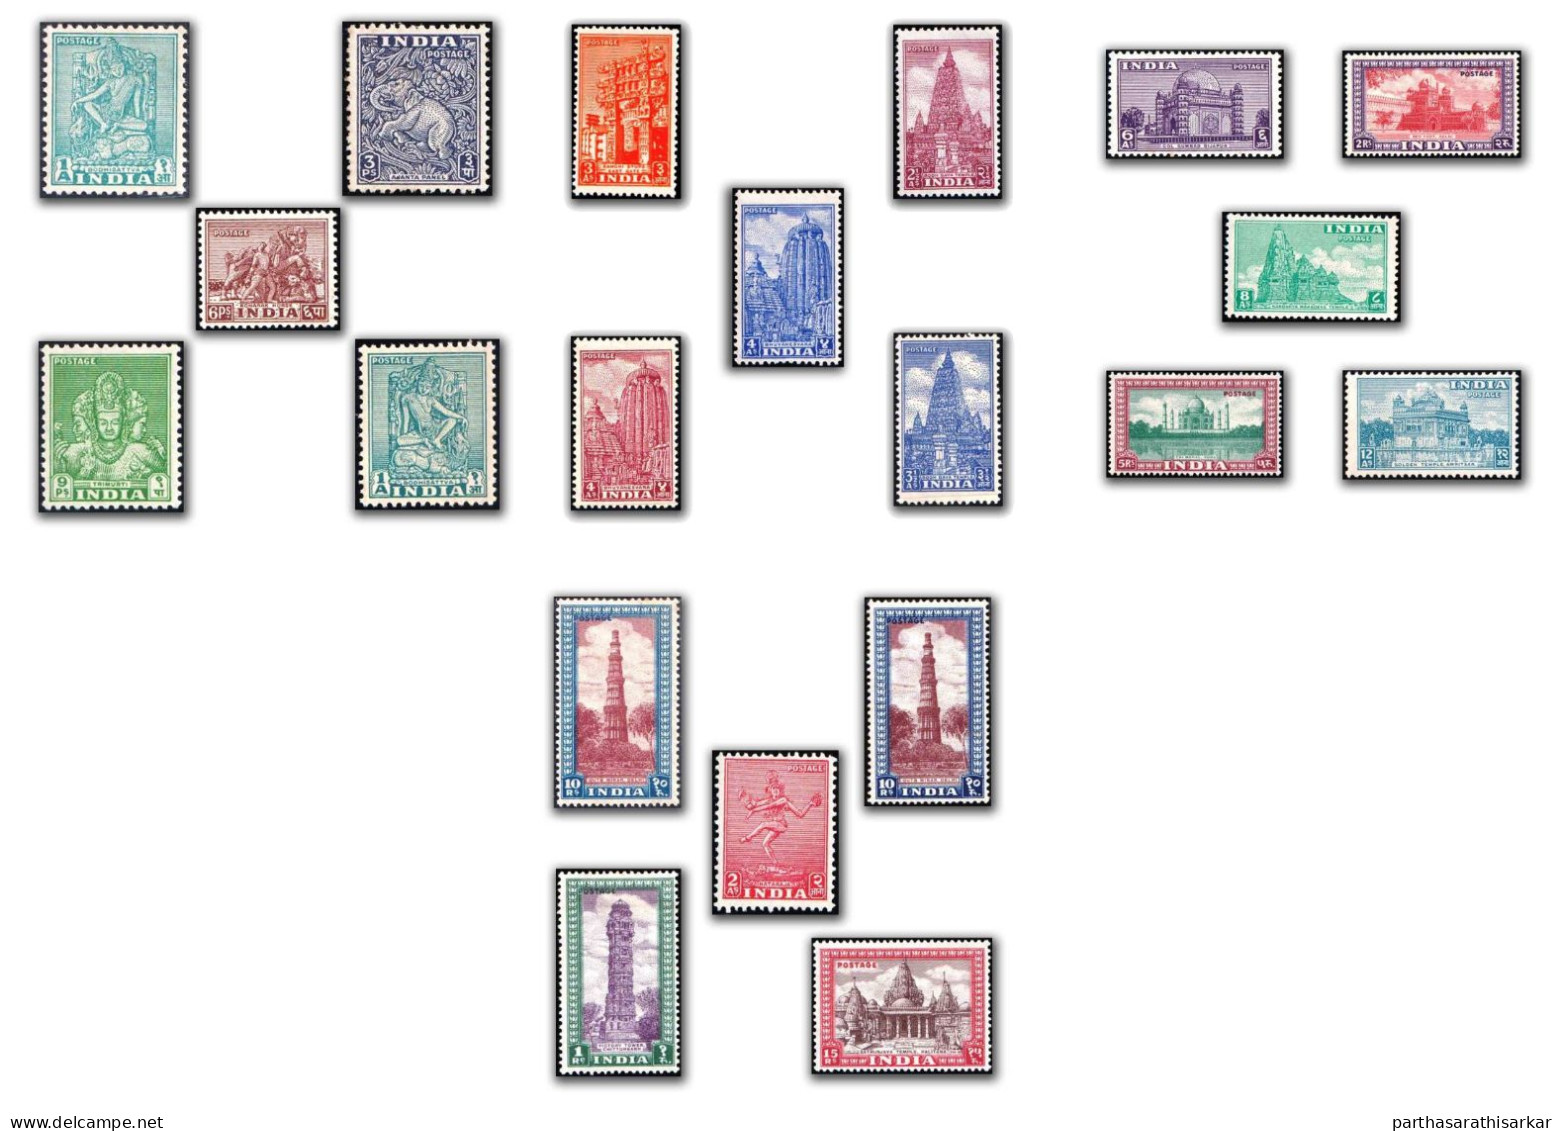 INDIA 1949 - 1951 ARCHAEOLOGICAL AND HISTORICAL MONUMENTS 1ST DEFINITIVE SERIES COMPLETE SET MINT CONDITION - Unused Stamps